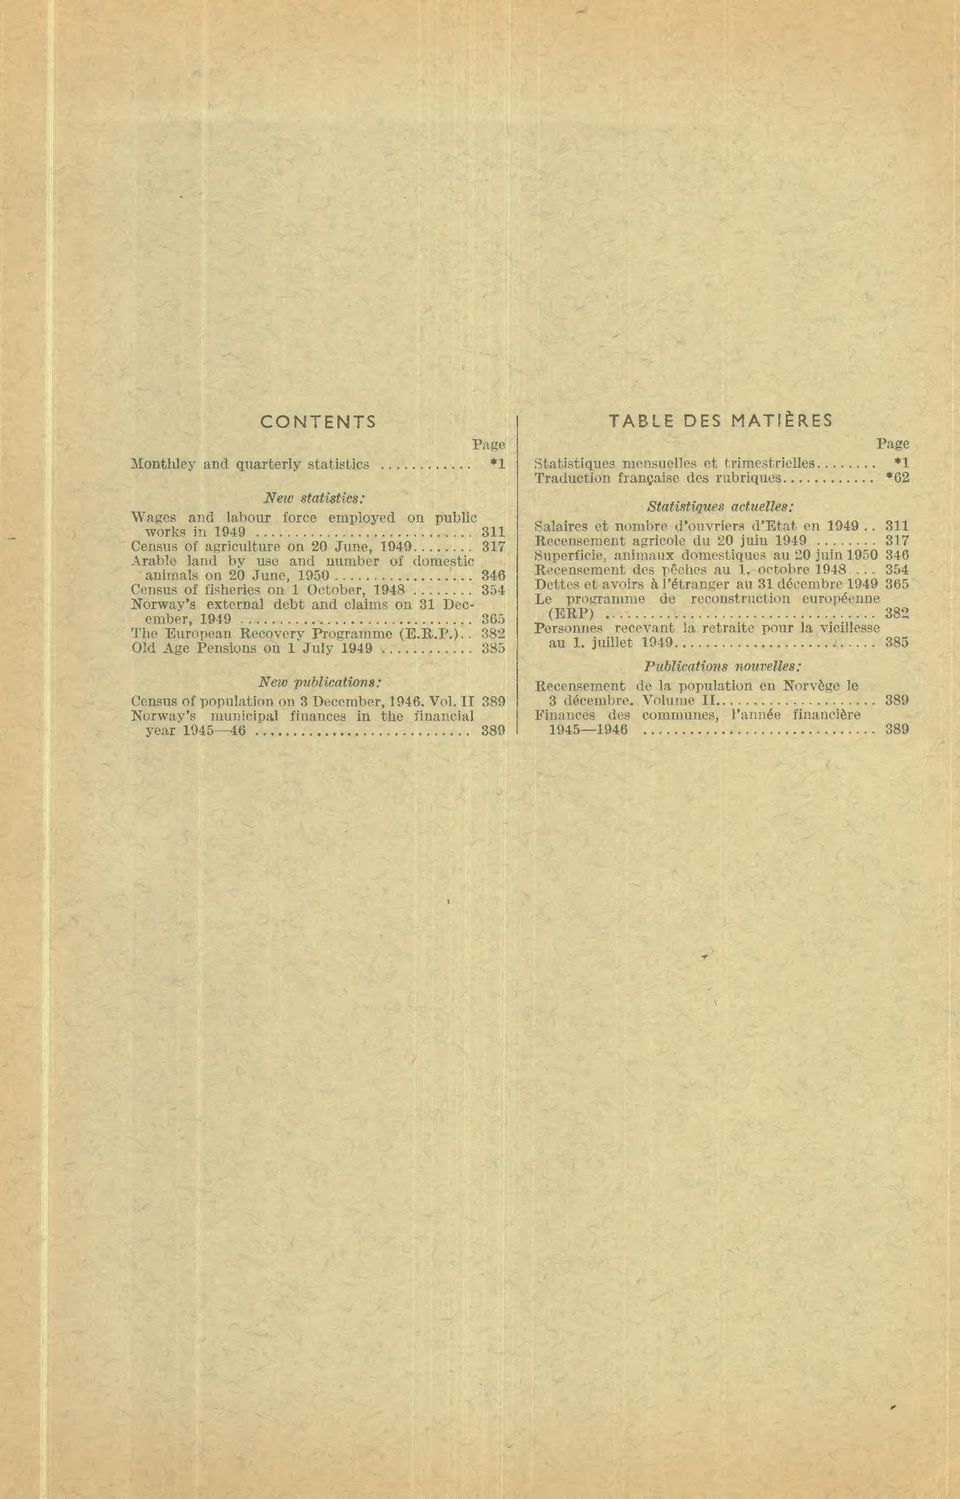 382 Old Age Pensions on 1 July 1949 385 New publications: Census of population on 3 December, 1946. Vol.